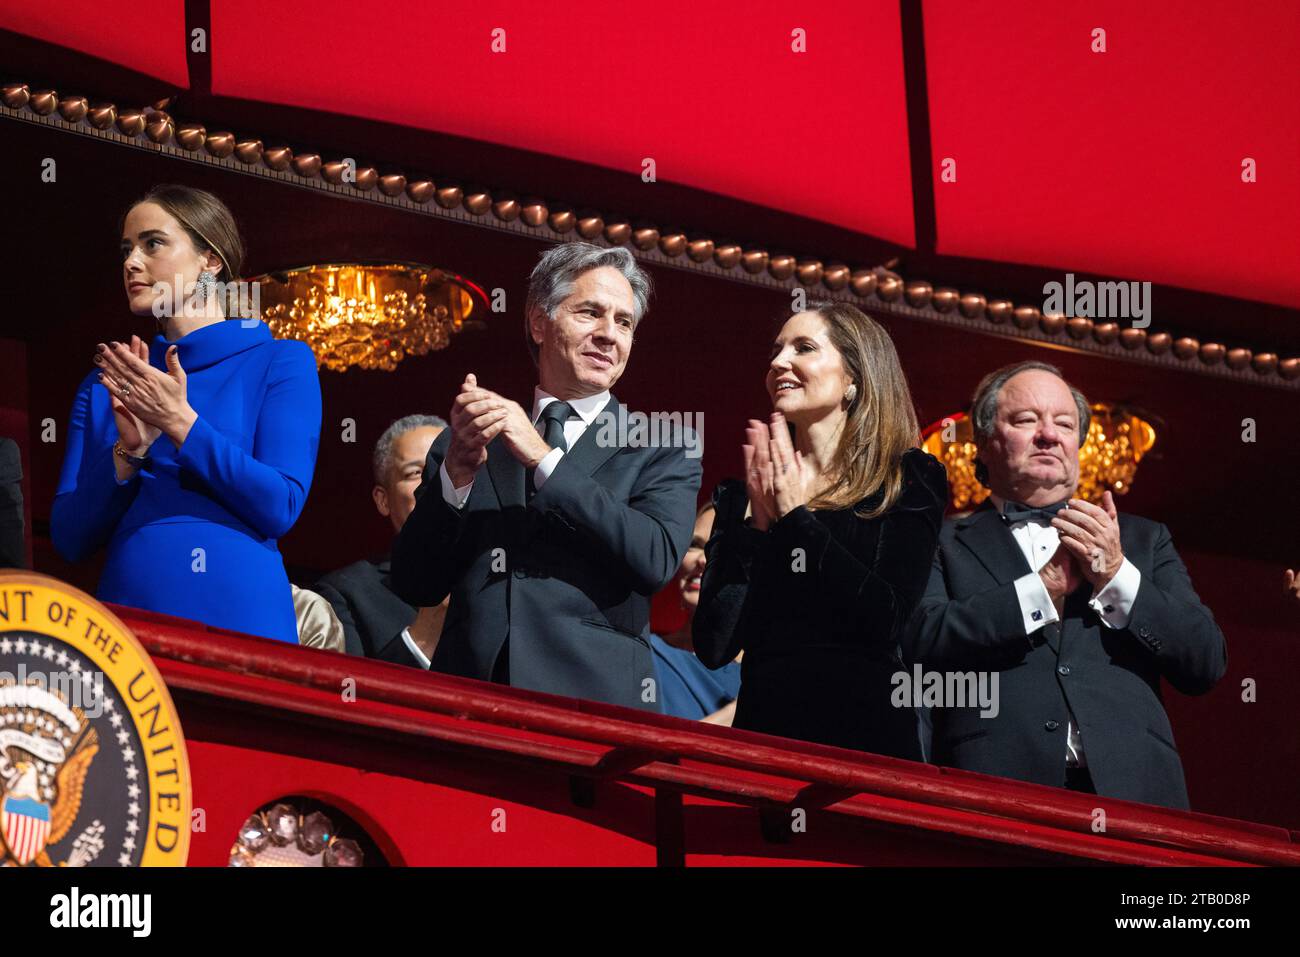 Washington, DC, USA. 03rd Dec, 2023. US Secretary of State Antony Blinken (C-L) and his wife, Evan Ryan (C-R), attend the 2023 Kennedy Center Honors at the Kennedy Center in Washington, DC, USA, 03 December 2023. Recipients of the 46th Kennedy Center Honors for lifetime artistic achievement include actor and comedian Billy Crystal, soprano Renee Fleming, British singer-songwriter Barry Gibb, singer and actress Queen Latifah, and singer Dionne Warwick. Credit: Jim LoScalzo/Pool via CNP/dpa/Alamy Live News Stock Photo